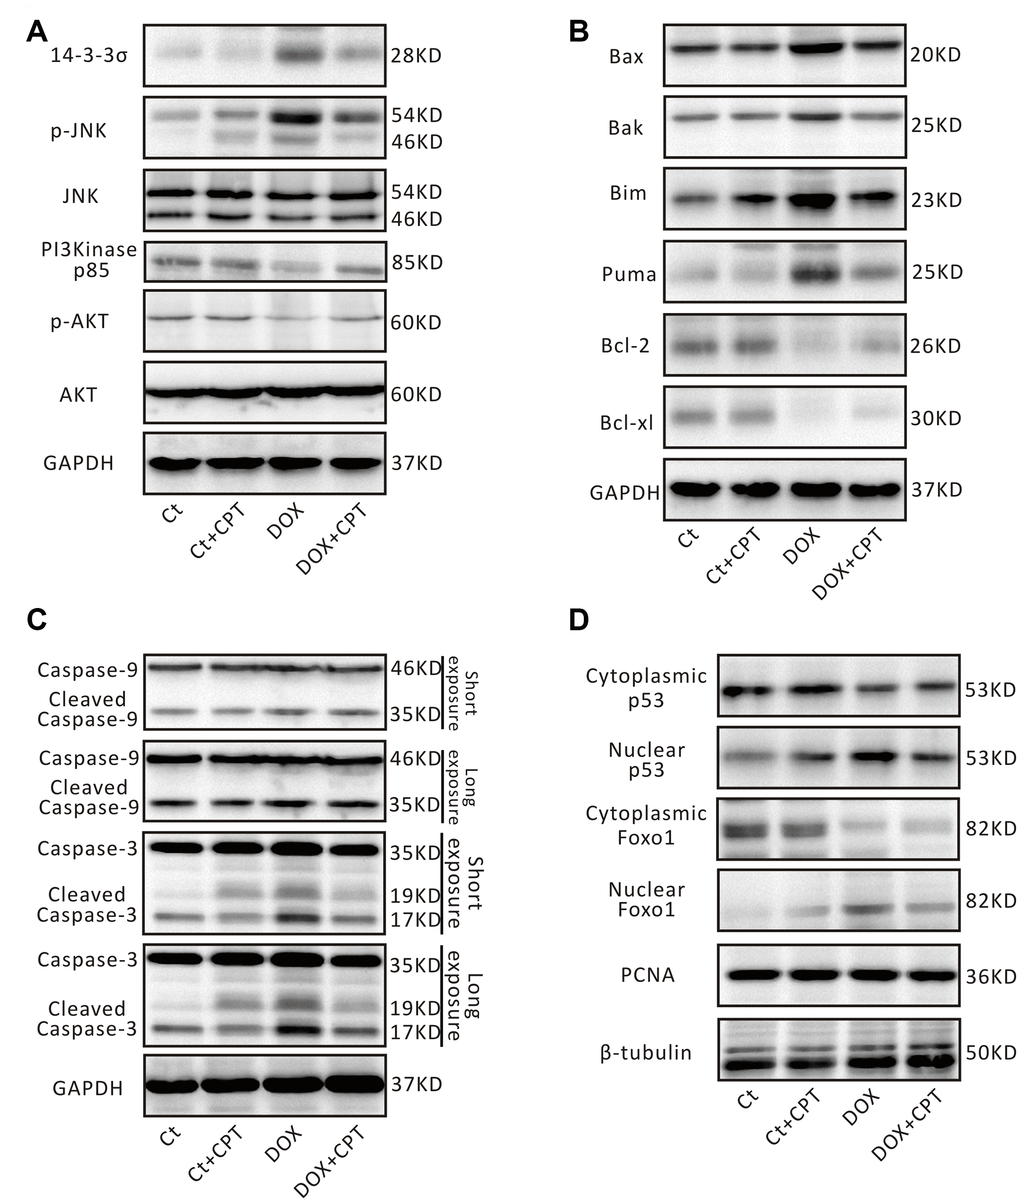 Cryptotanshinone (CPT) treatment adjusted p53 signaling pathway in the rat heart induced by doxorubicin. Representative blots of 14-3-3σ, p-JNK, JNK, PI3K p85, p-AKT, AKT, and GAPDH (A). Representative blots of Bax, Bak, Bim, PUMA, Bcl-2, Bcl-xl, and GAPDH (B). Representative blots of pro-caspase-3/cleaved caspase-3, pro-caspase-9/cleaved caspase-9, and GAPDH (C). Representative blots of Foxo1, p53, PCNA, and β-tubulin (D). GAPDH, β-tubulin and PCNA were used as internal reference.